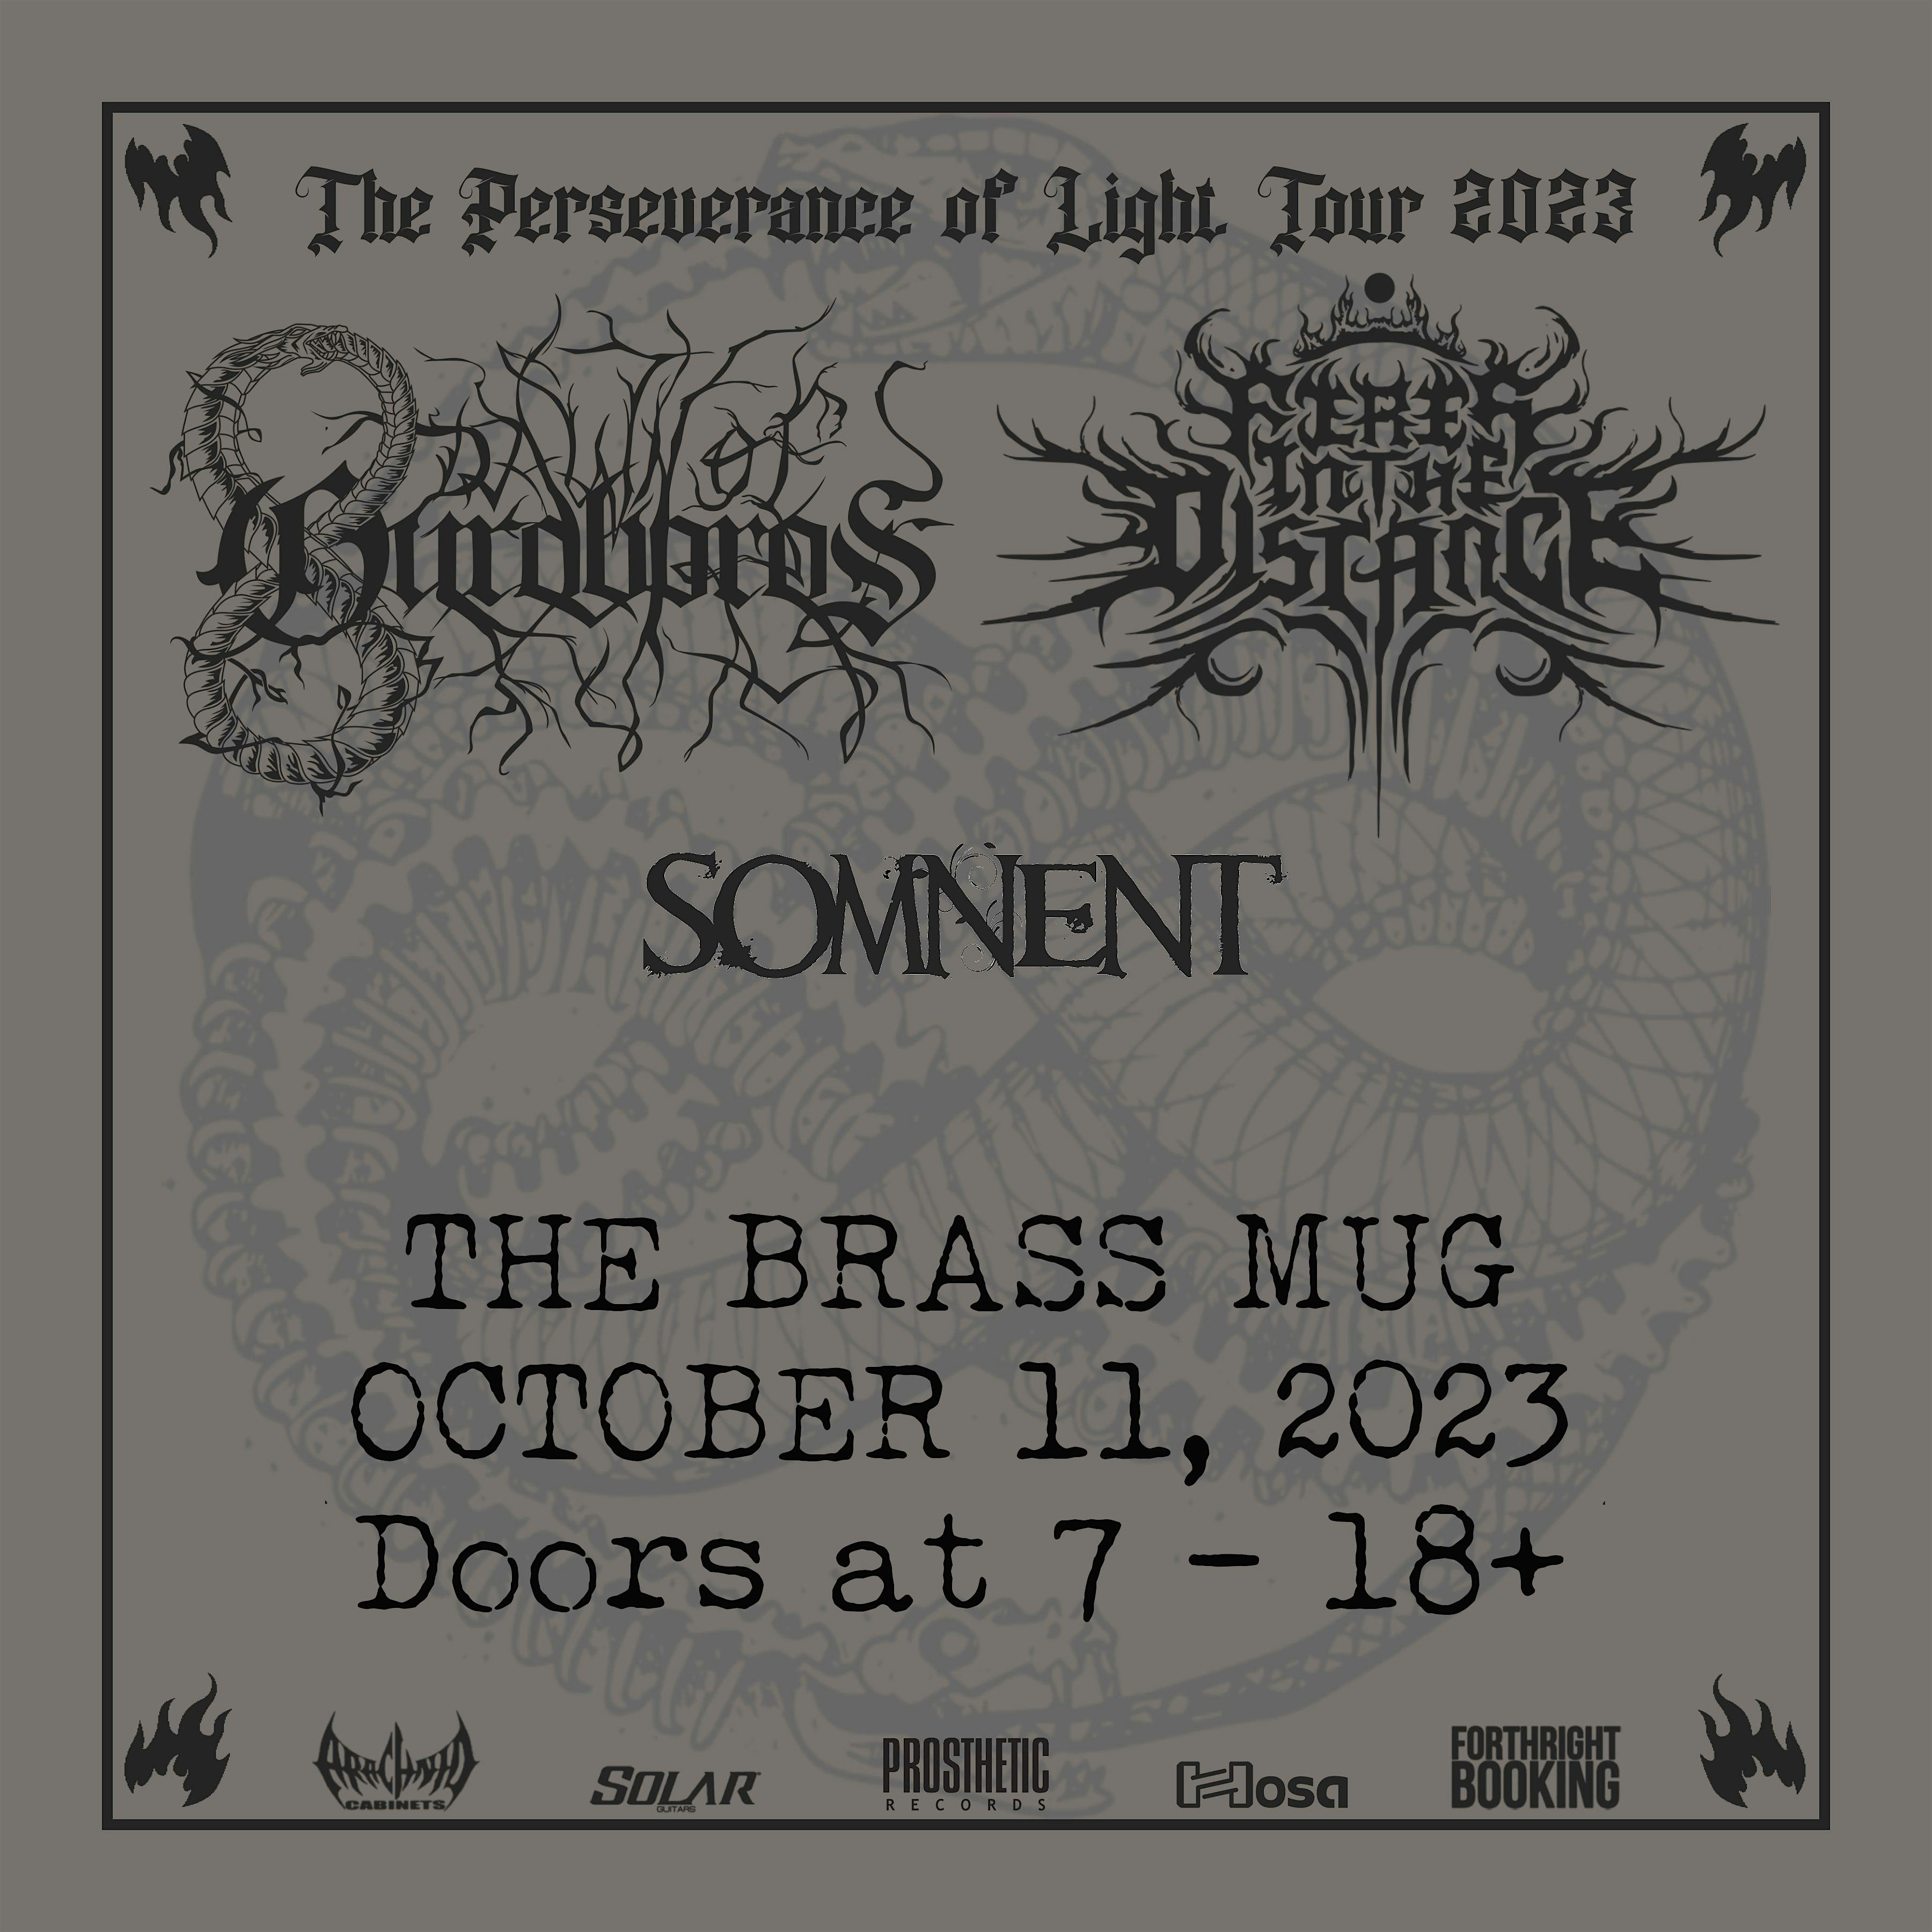 Dawn of Ouroboros, Fires in the Distance, and Somnent in Tampa at the Brass Mug